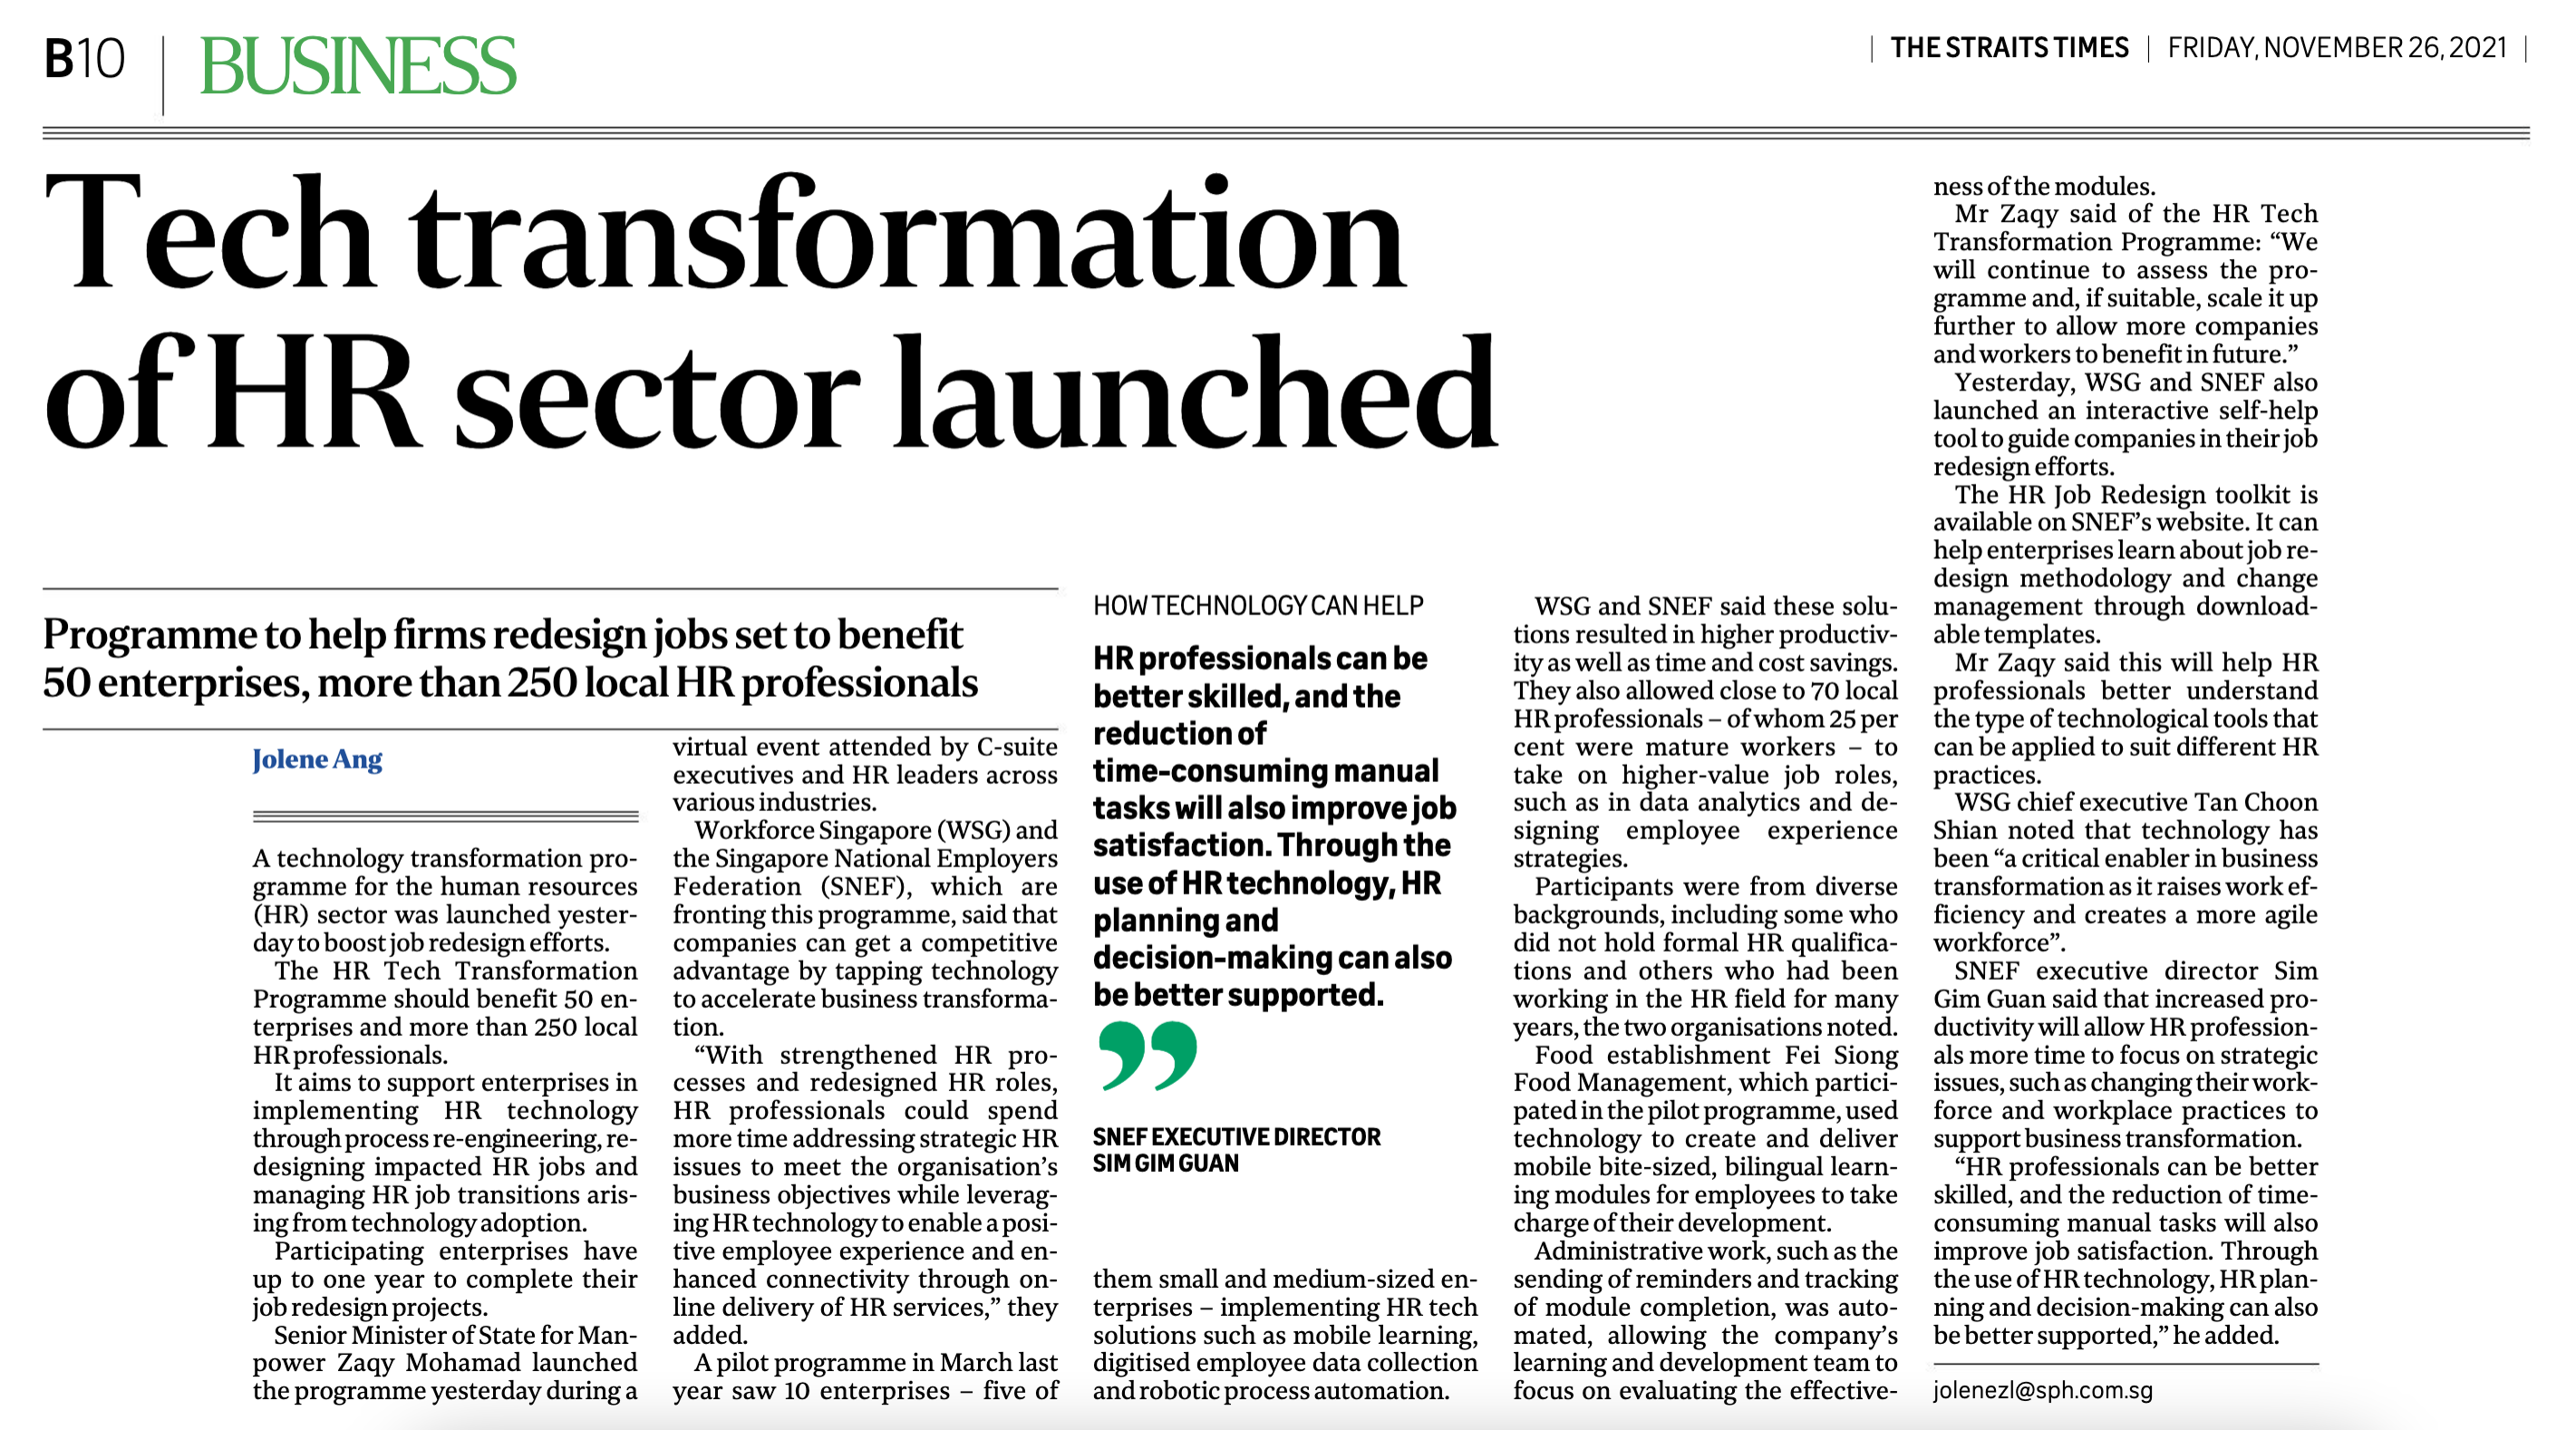 The Straits Times - Tech transformation of HR sector launched